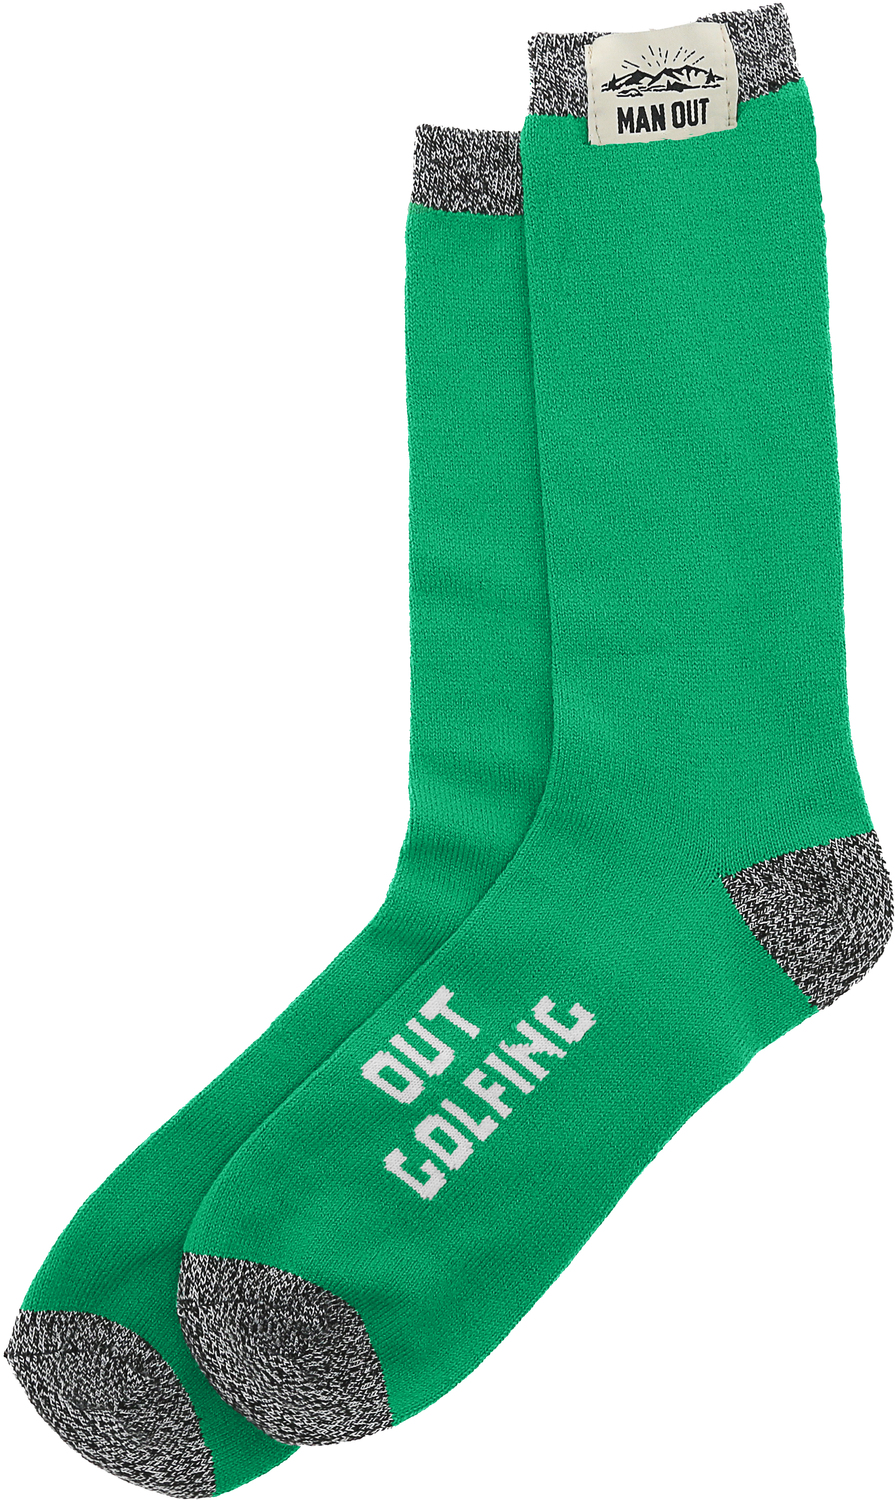 Out Golfing by Man Out - Out Golfing - Men's Socks